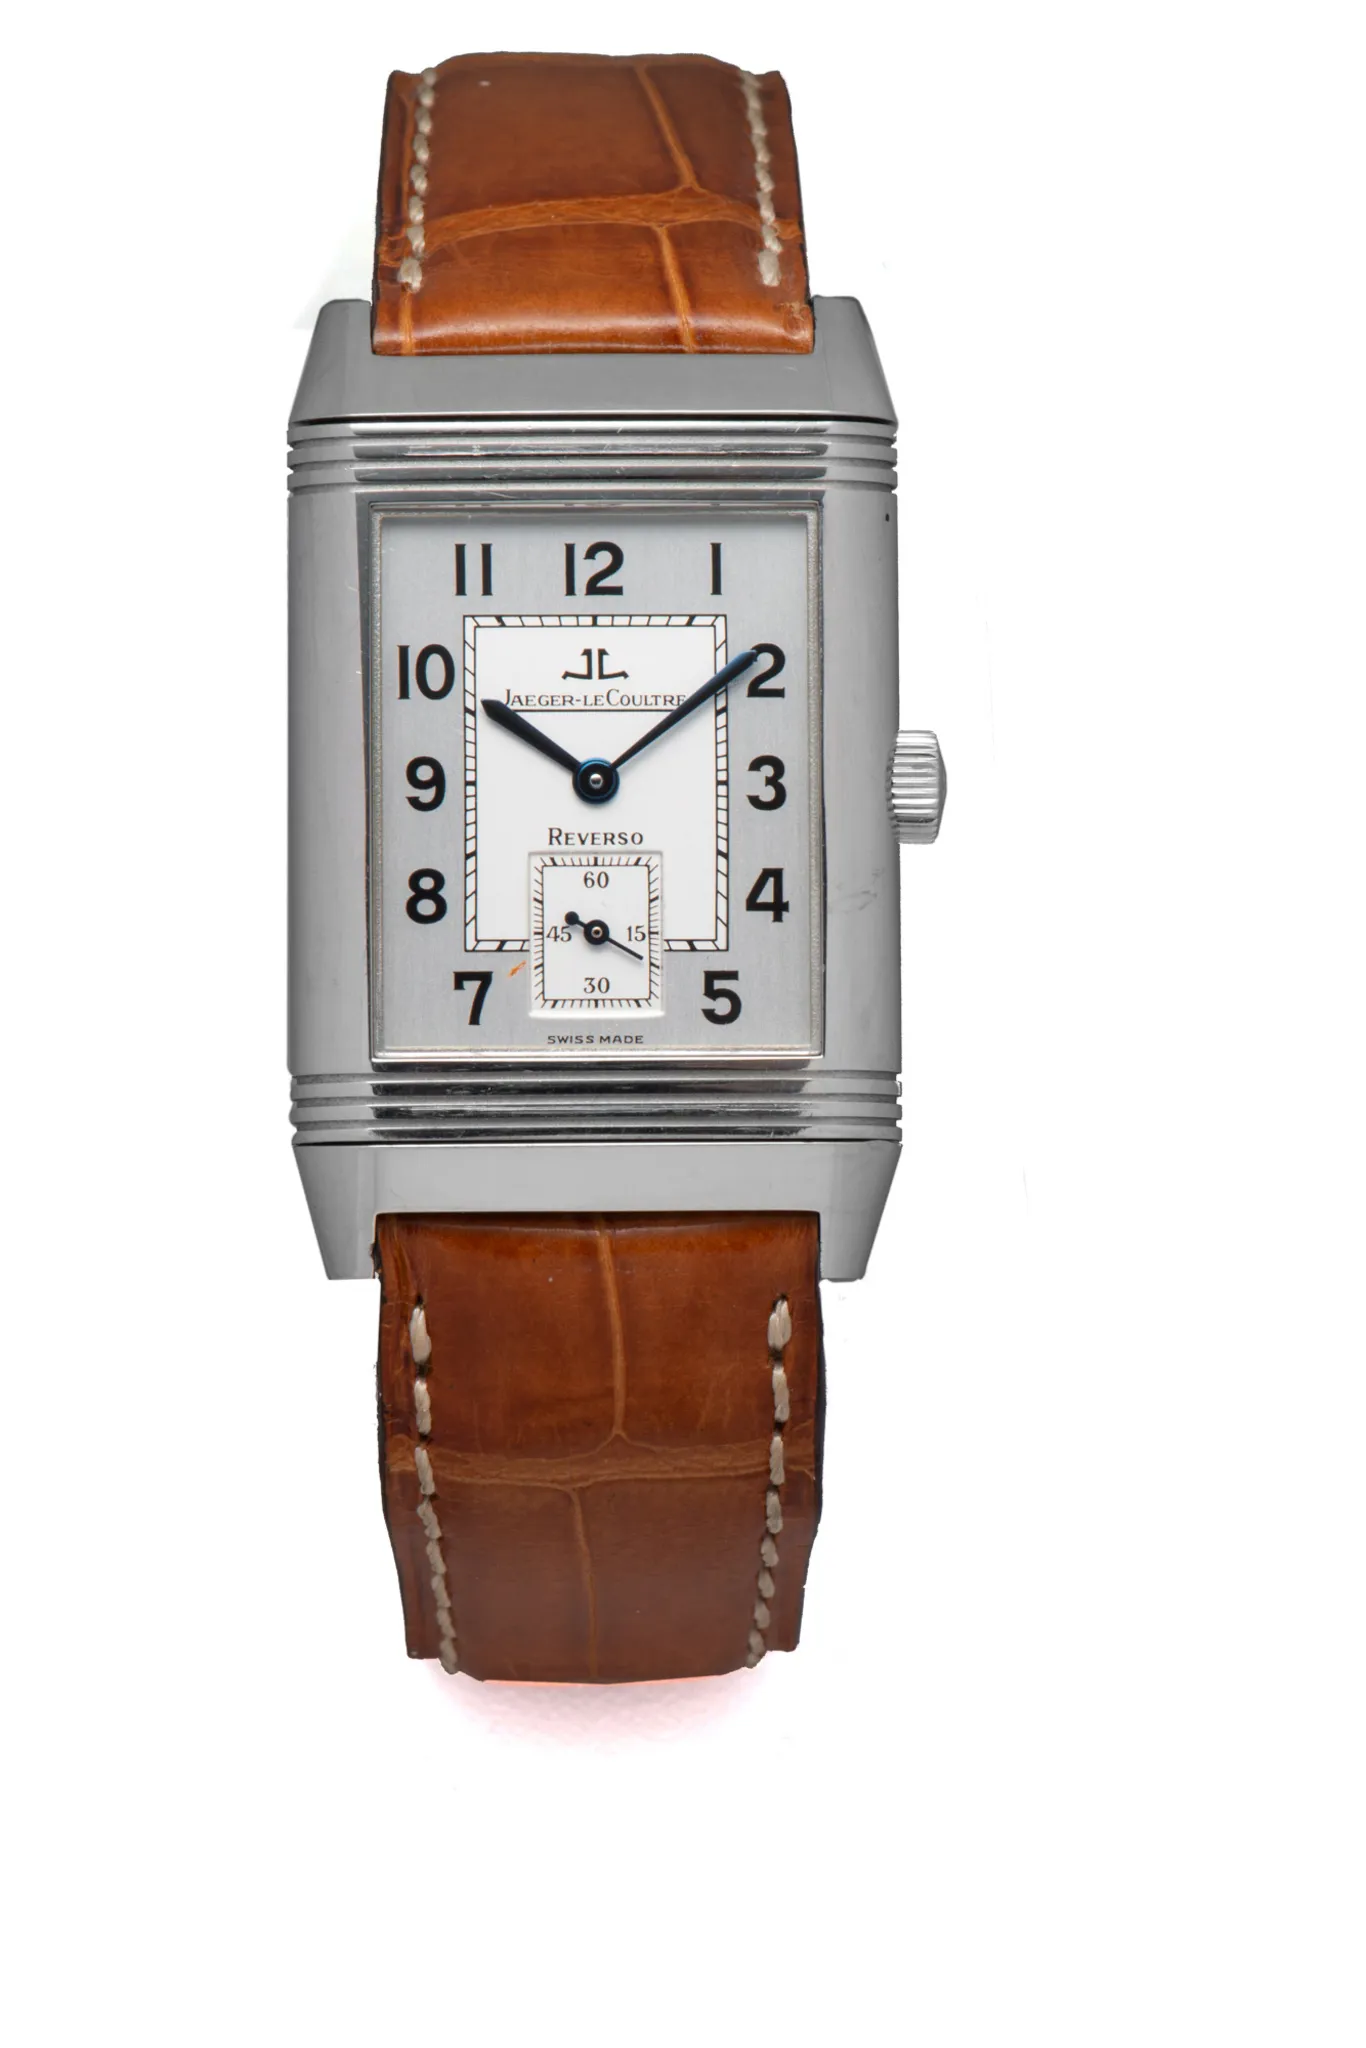 Jaeger-LeCoultre 270.8.62 43mm Stainless steel Silver